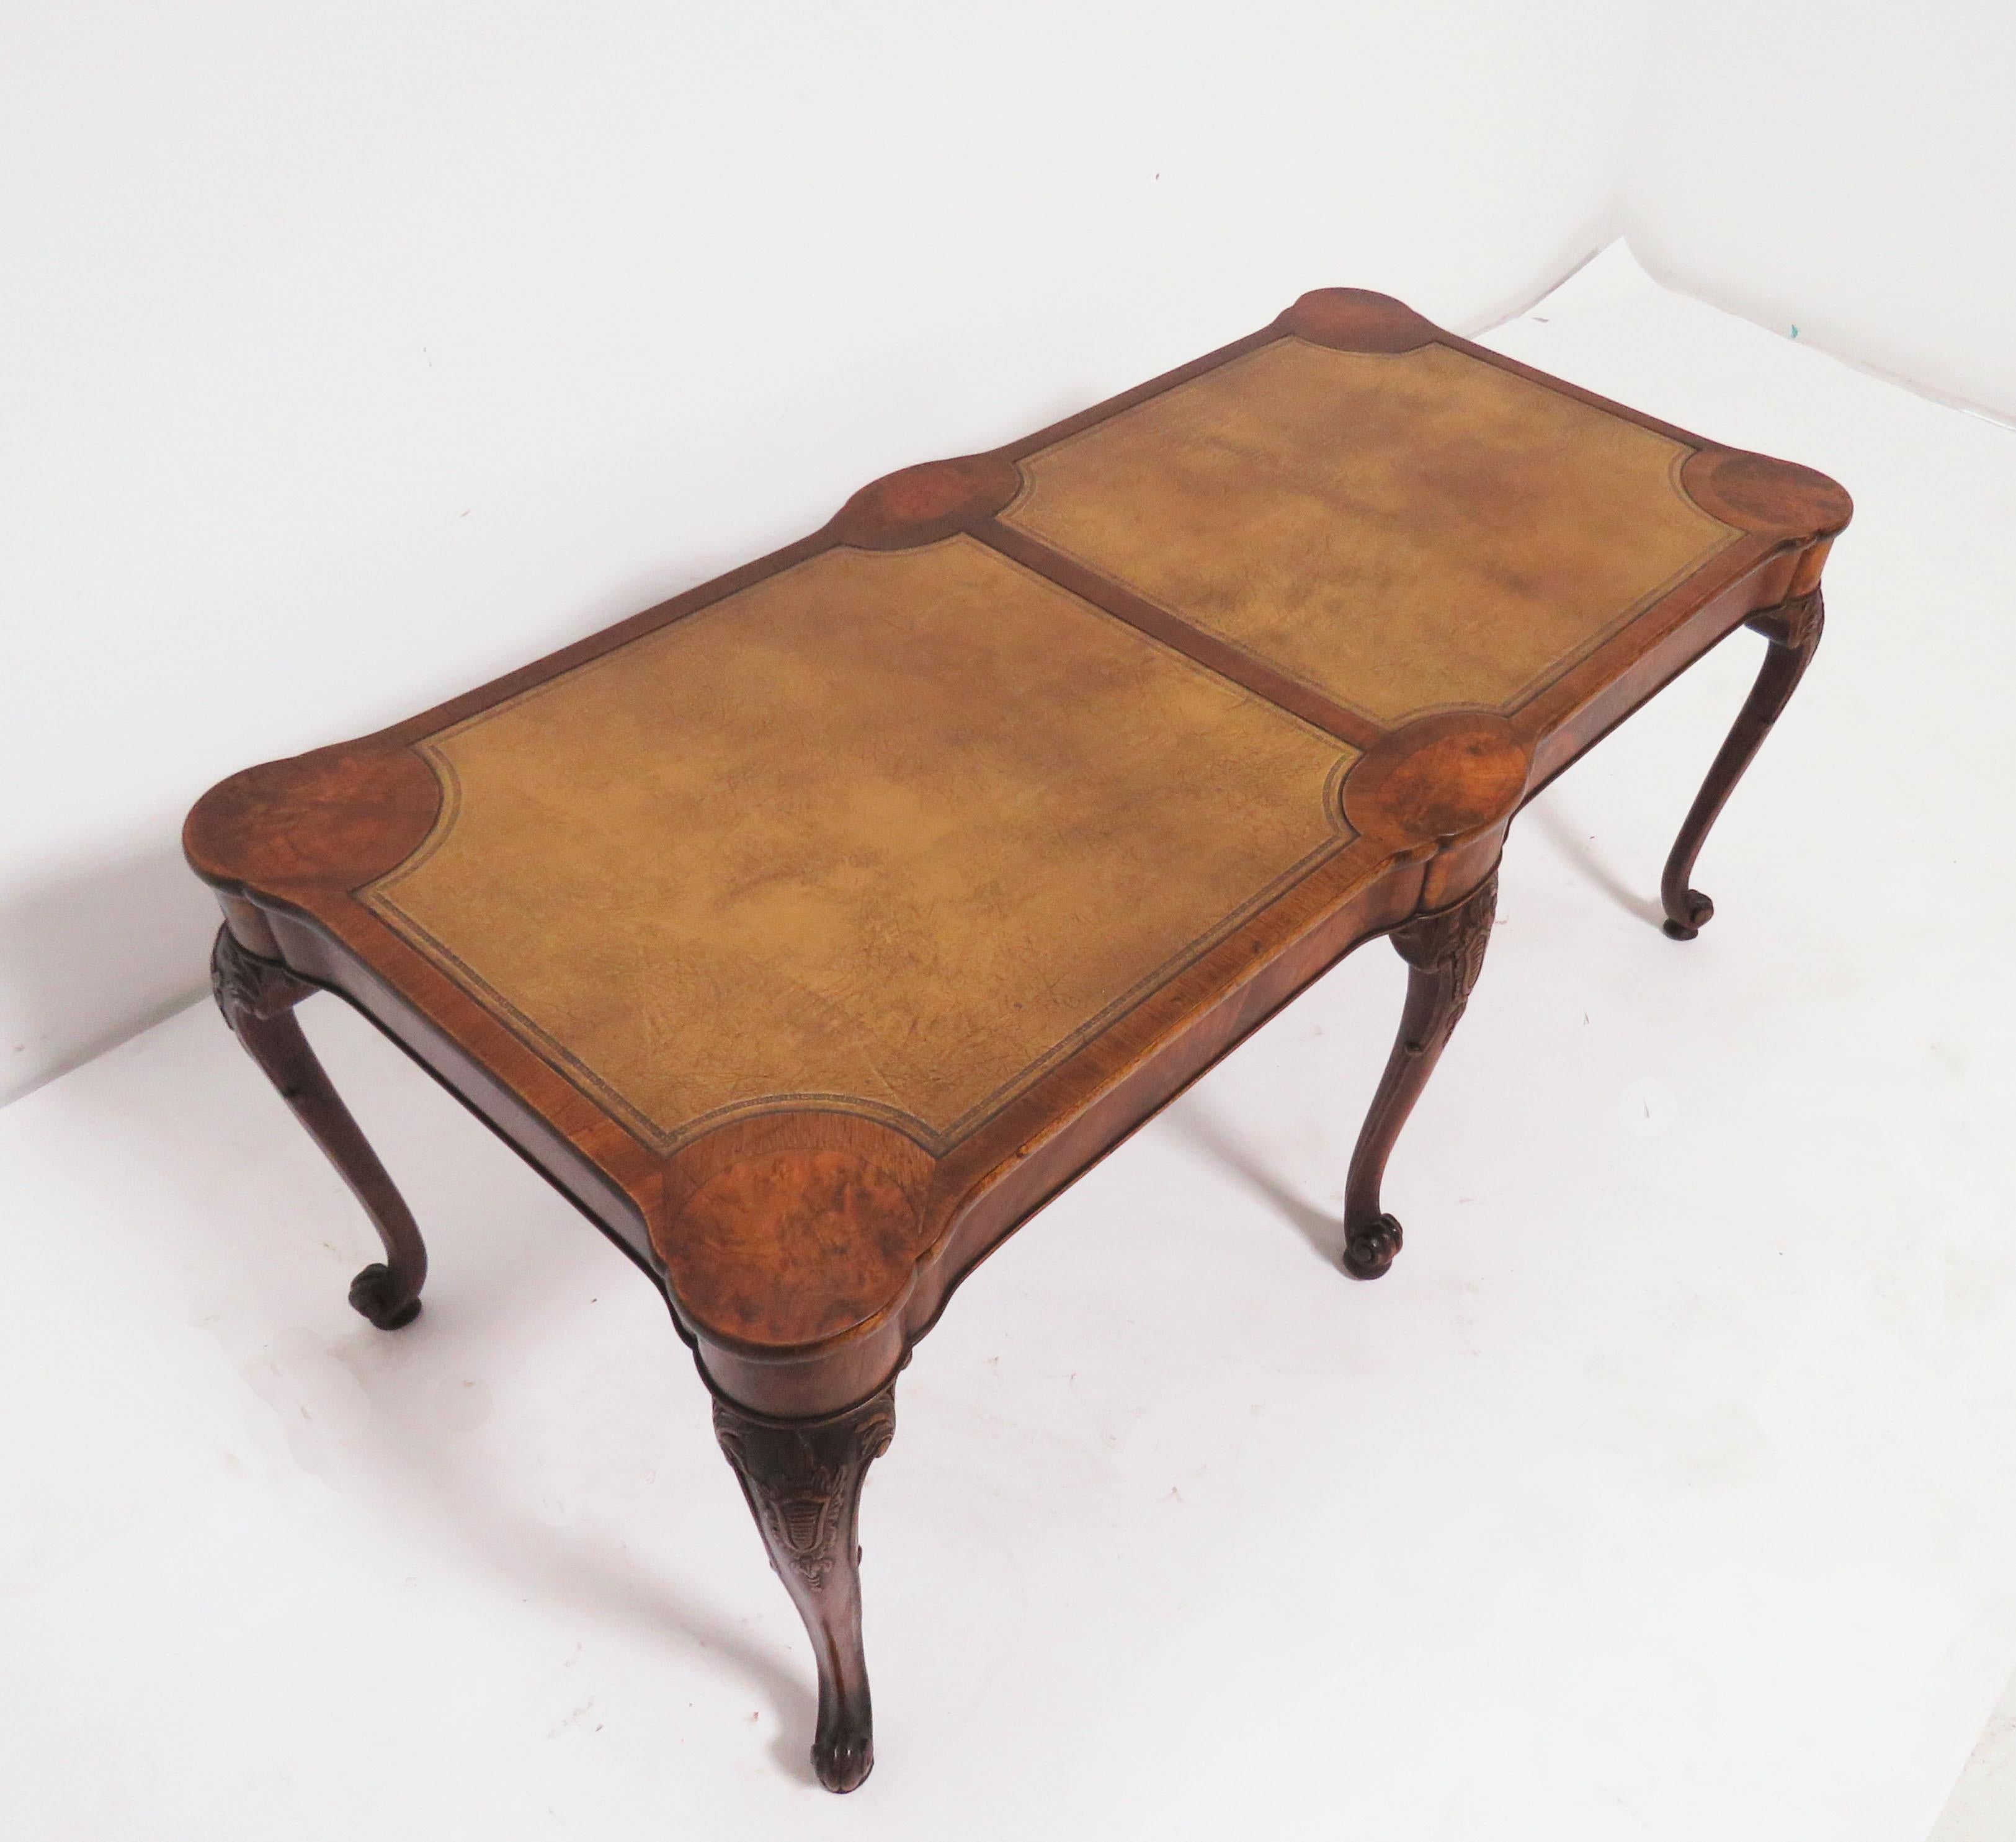 Mid-20th Century Charak Leather Topped Coffee Table in the Georgian Style, Dated 1937